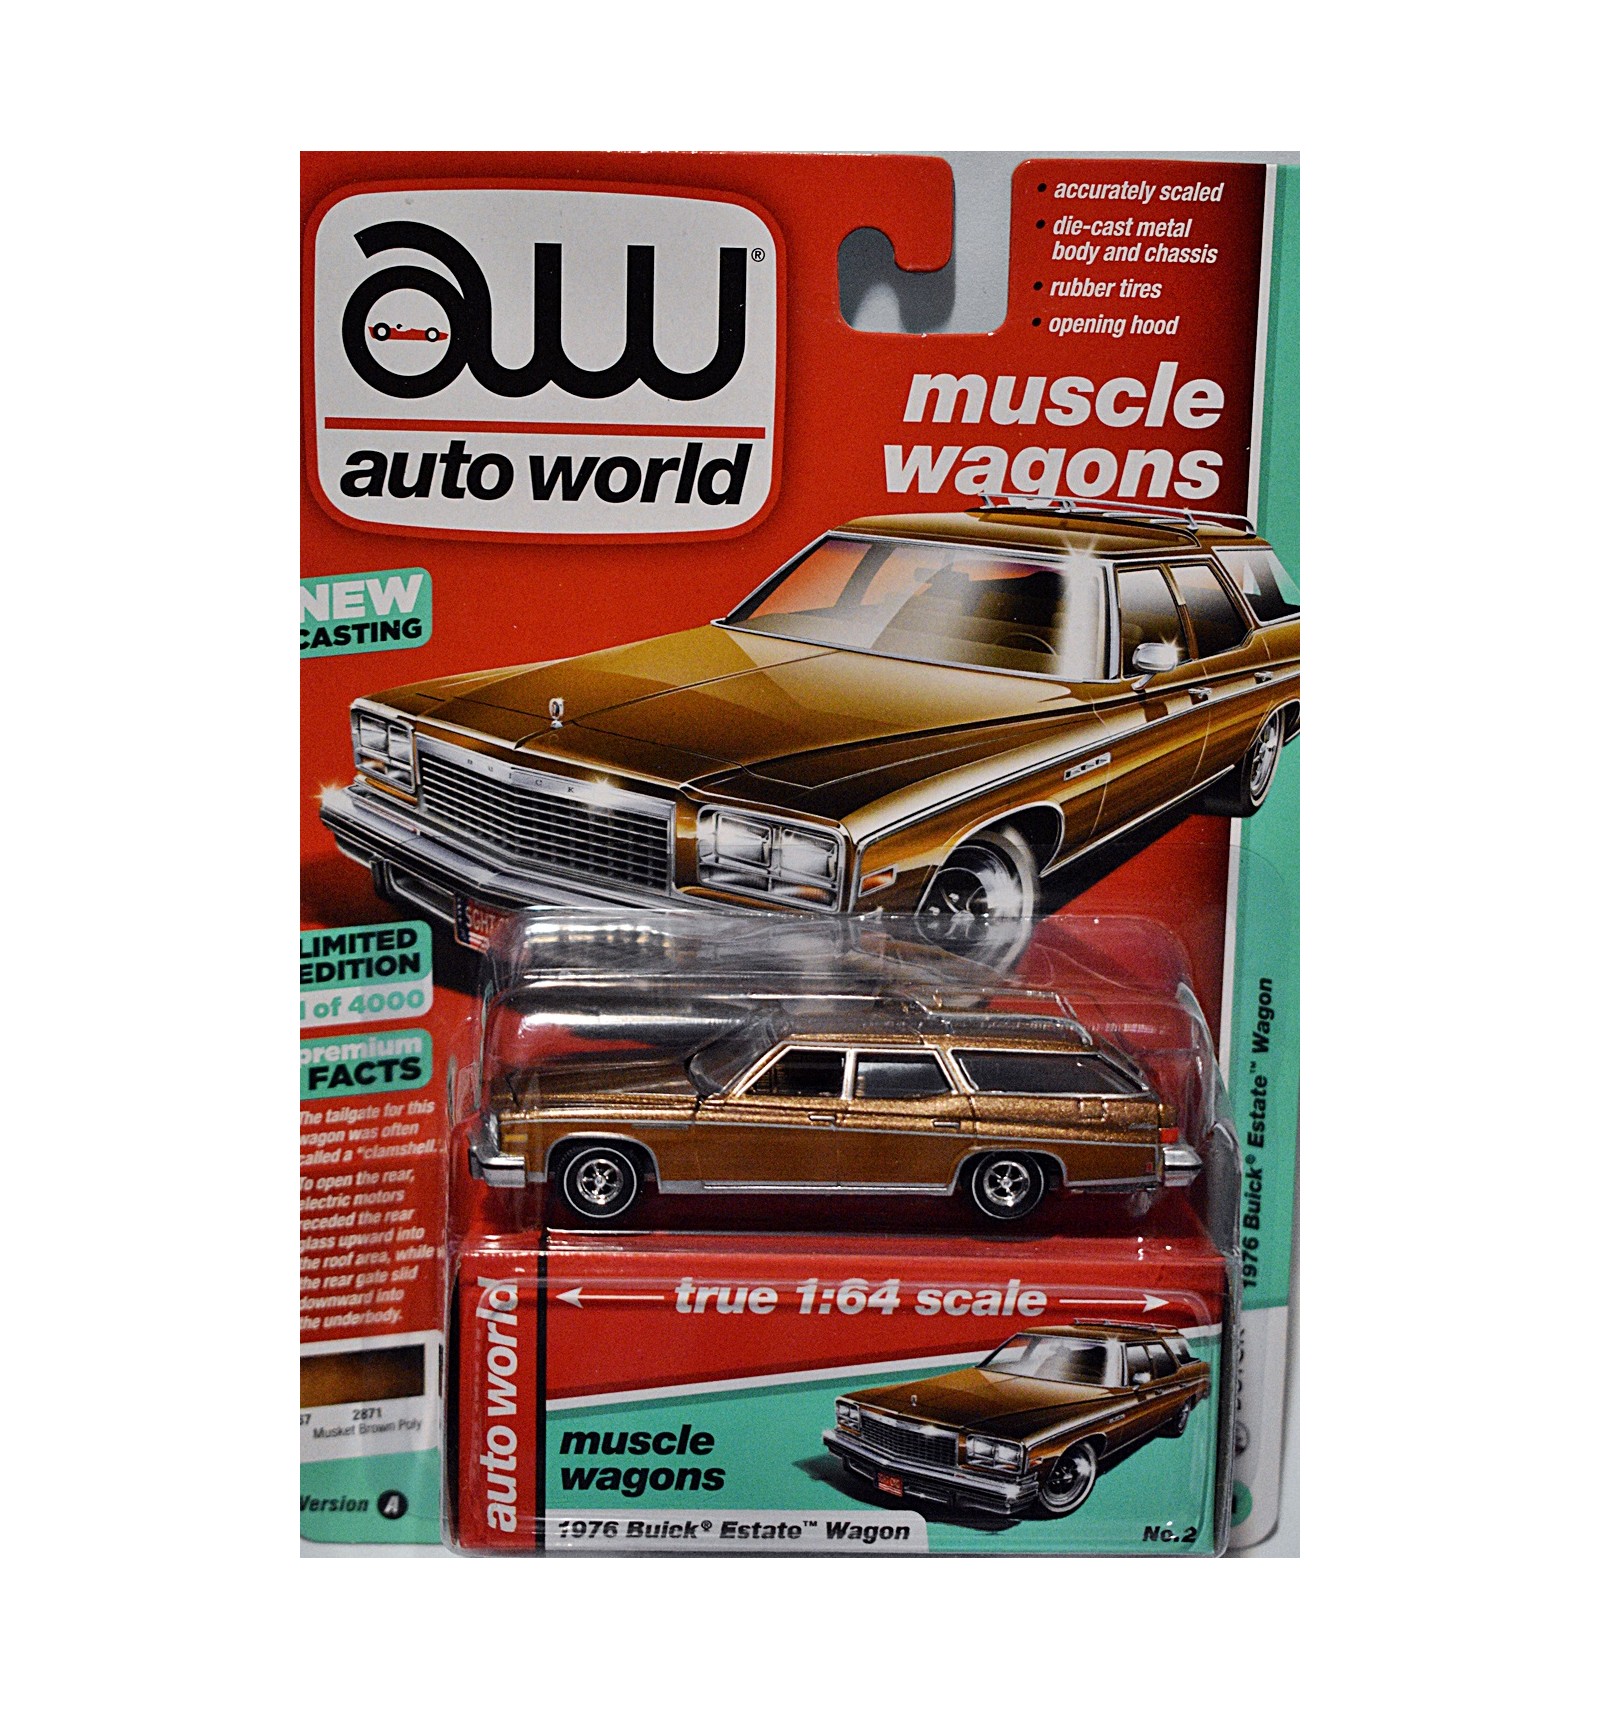 AUTO WORLD 2019 premium muscle wagons 1976 estate wagon,new casting,ver.a NEW 